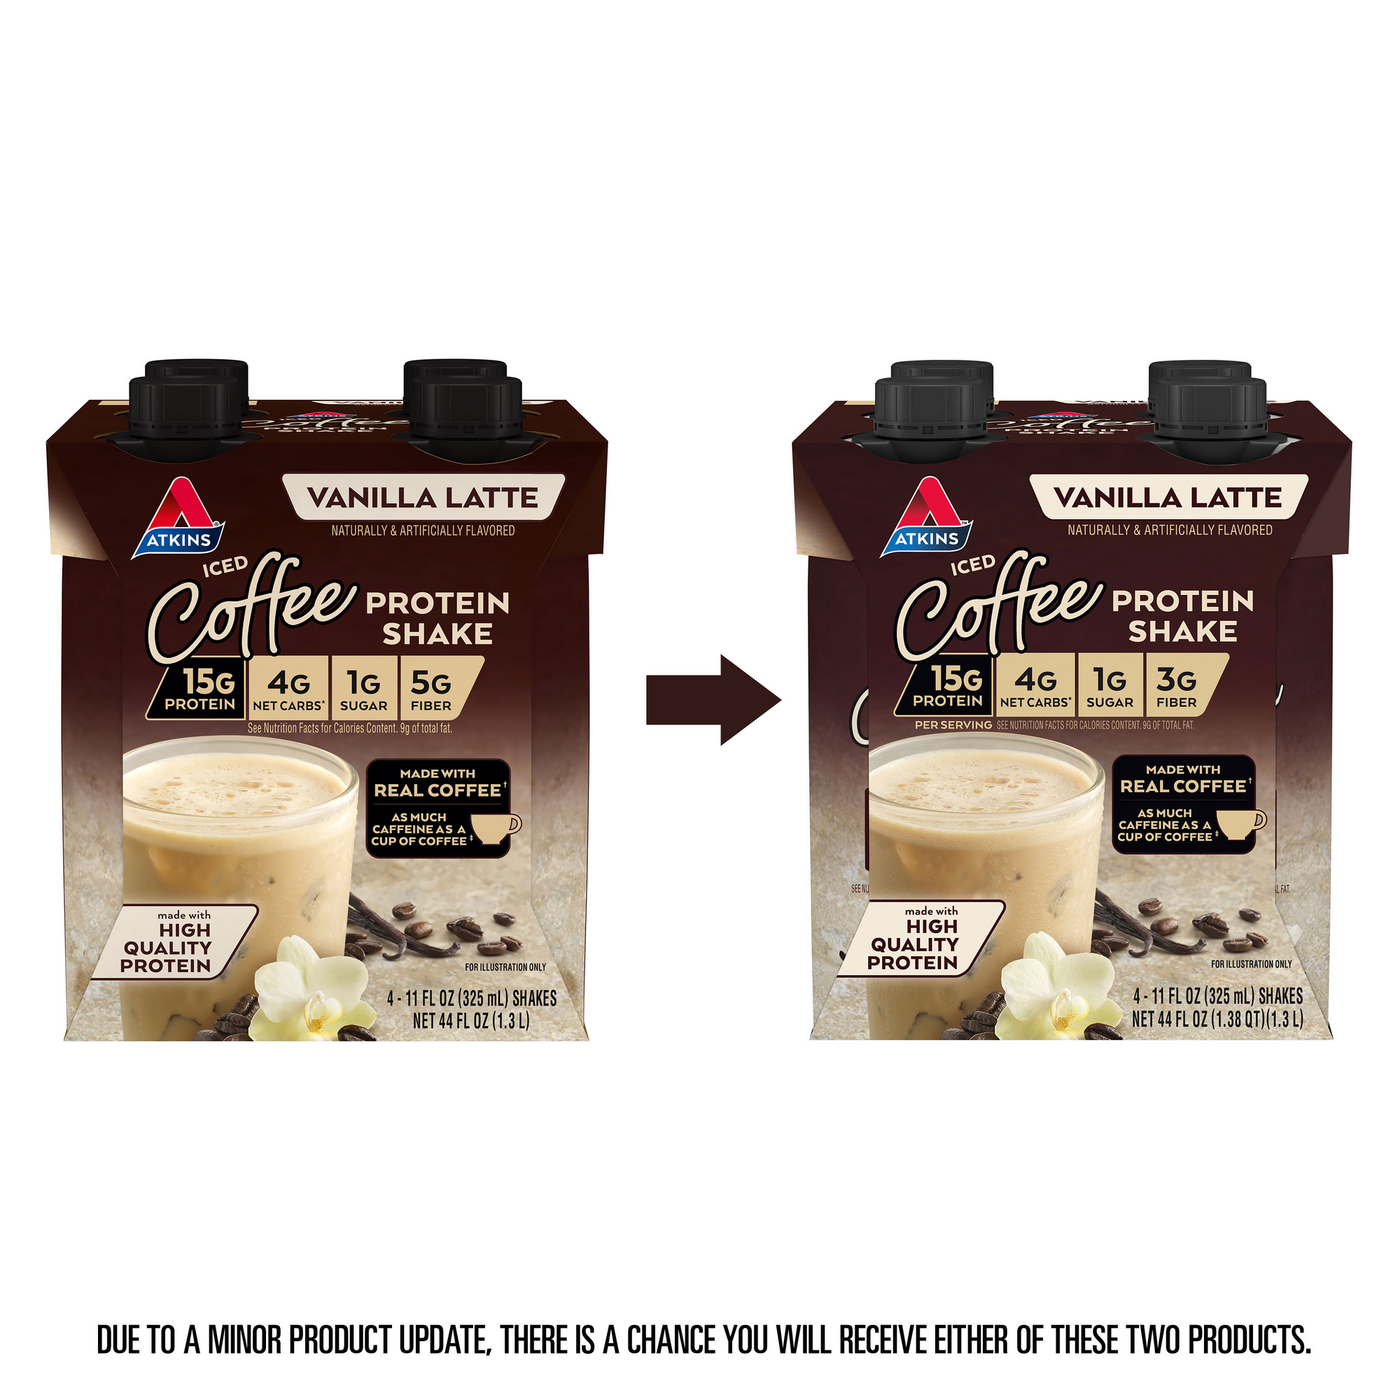 Vanilla Latte Iced Coffee Shake - outdated vs updated packaging